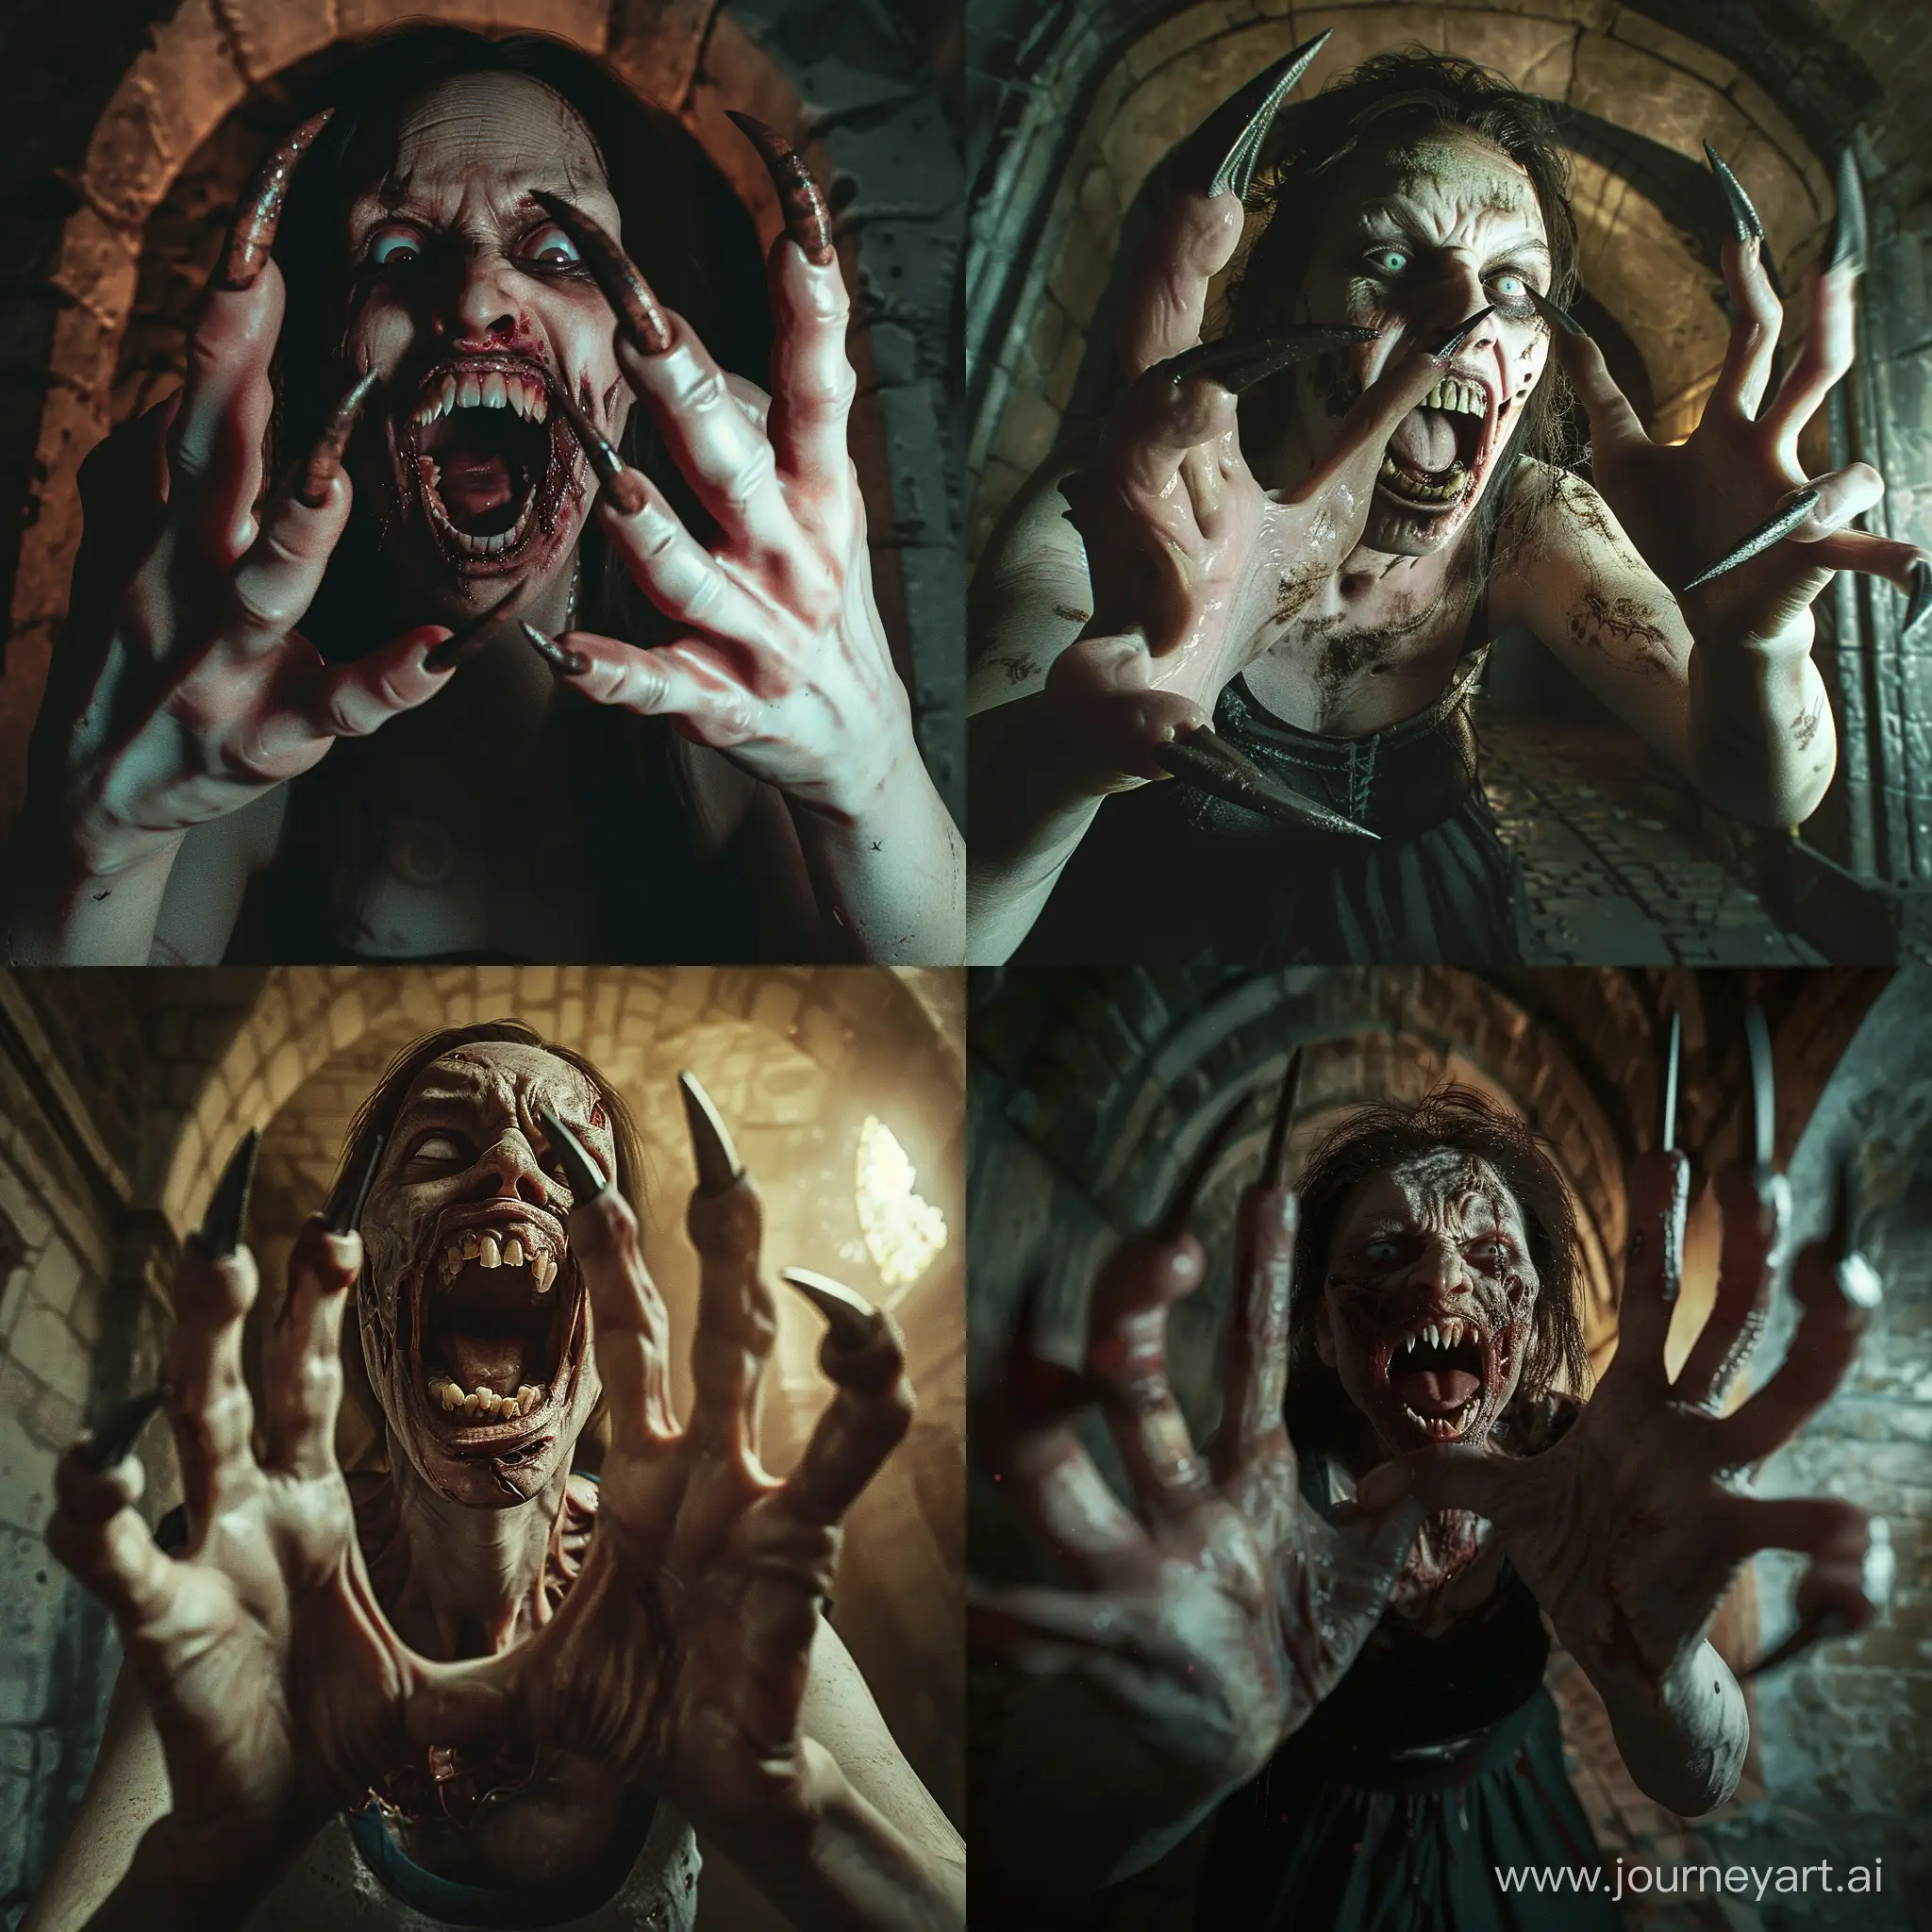 Terrifying-Zombie-Woman-Attack-in-Old-Crypt-HyperRealistic-Horror-Scene